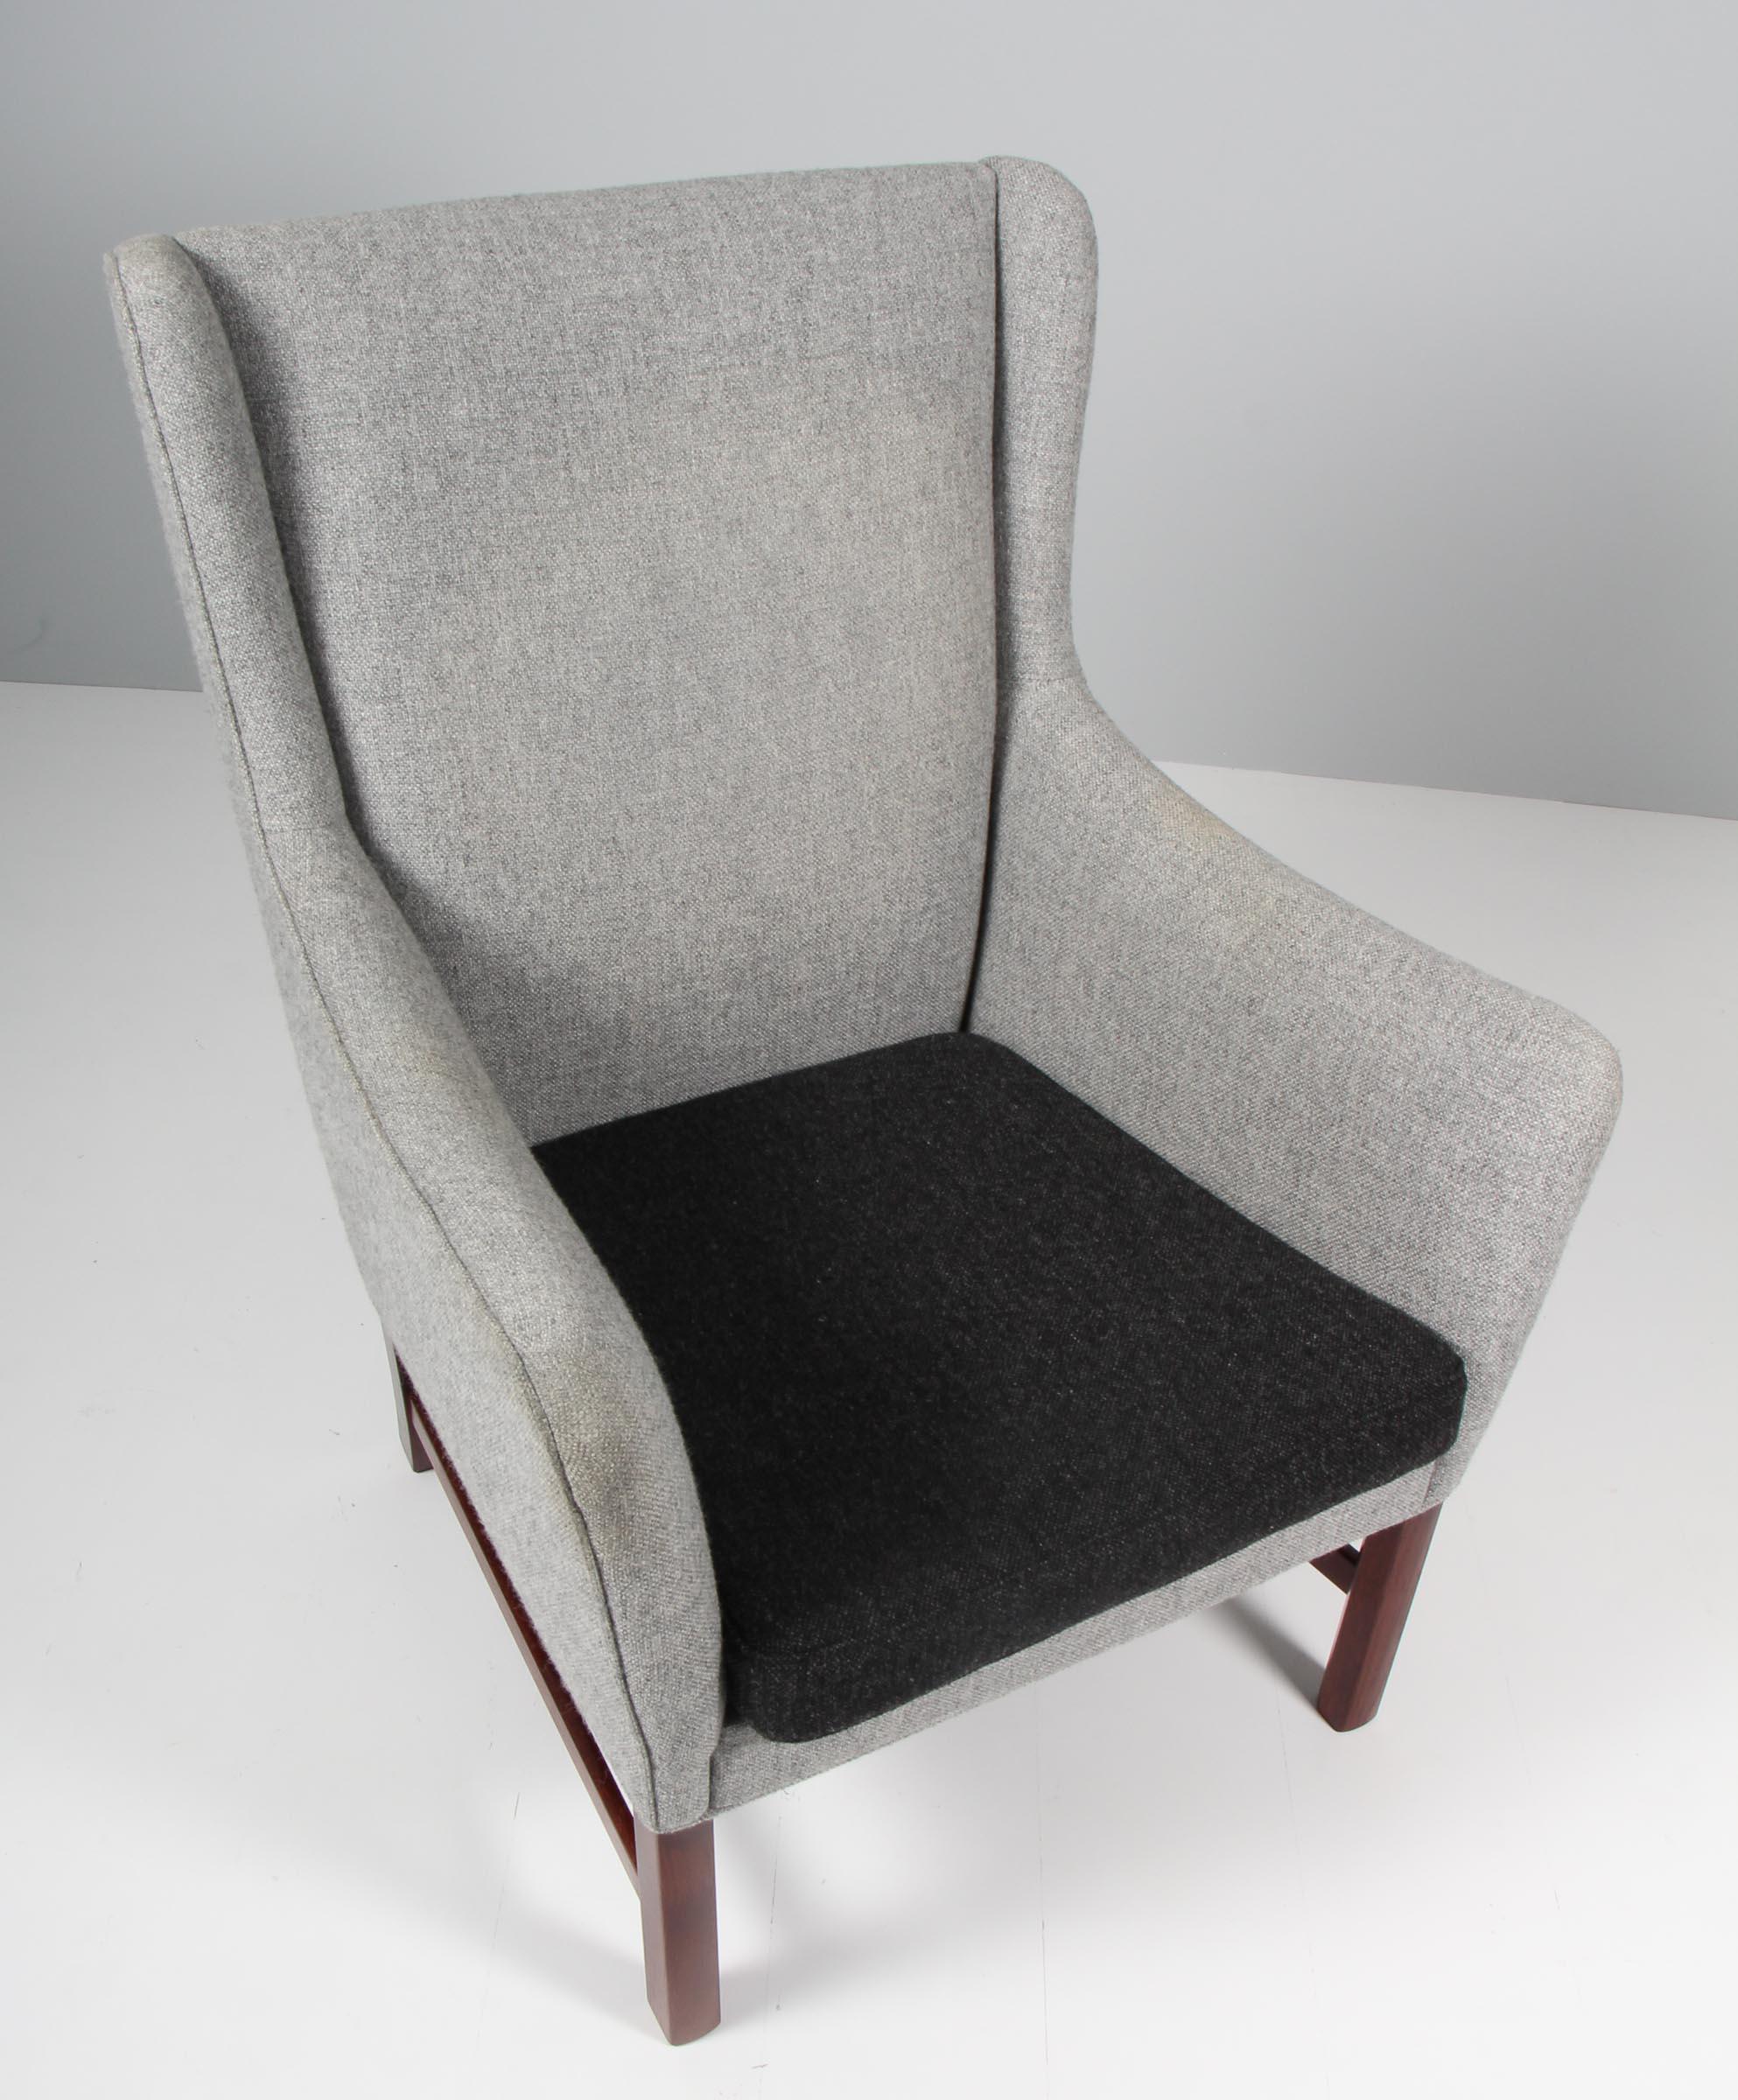 Ole Wanscher lounge chair with gret hallingdal wool from Kvadrat, new upholstered cushion with darker tone Hallingdal from Kvadrat.

Legs in stained oak. 

Model PJ60, by Poul Jeppesen.